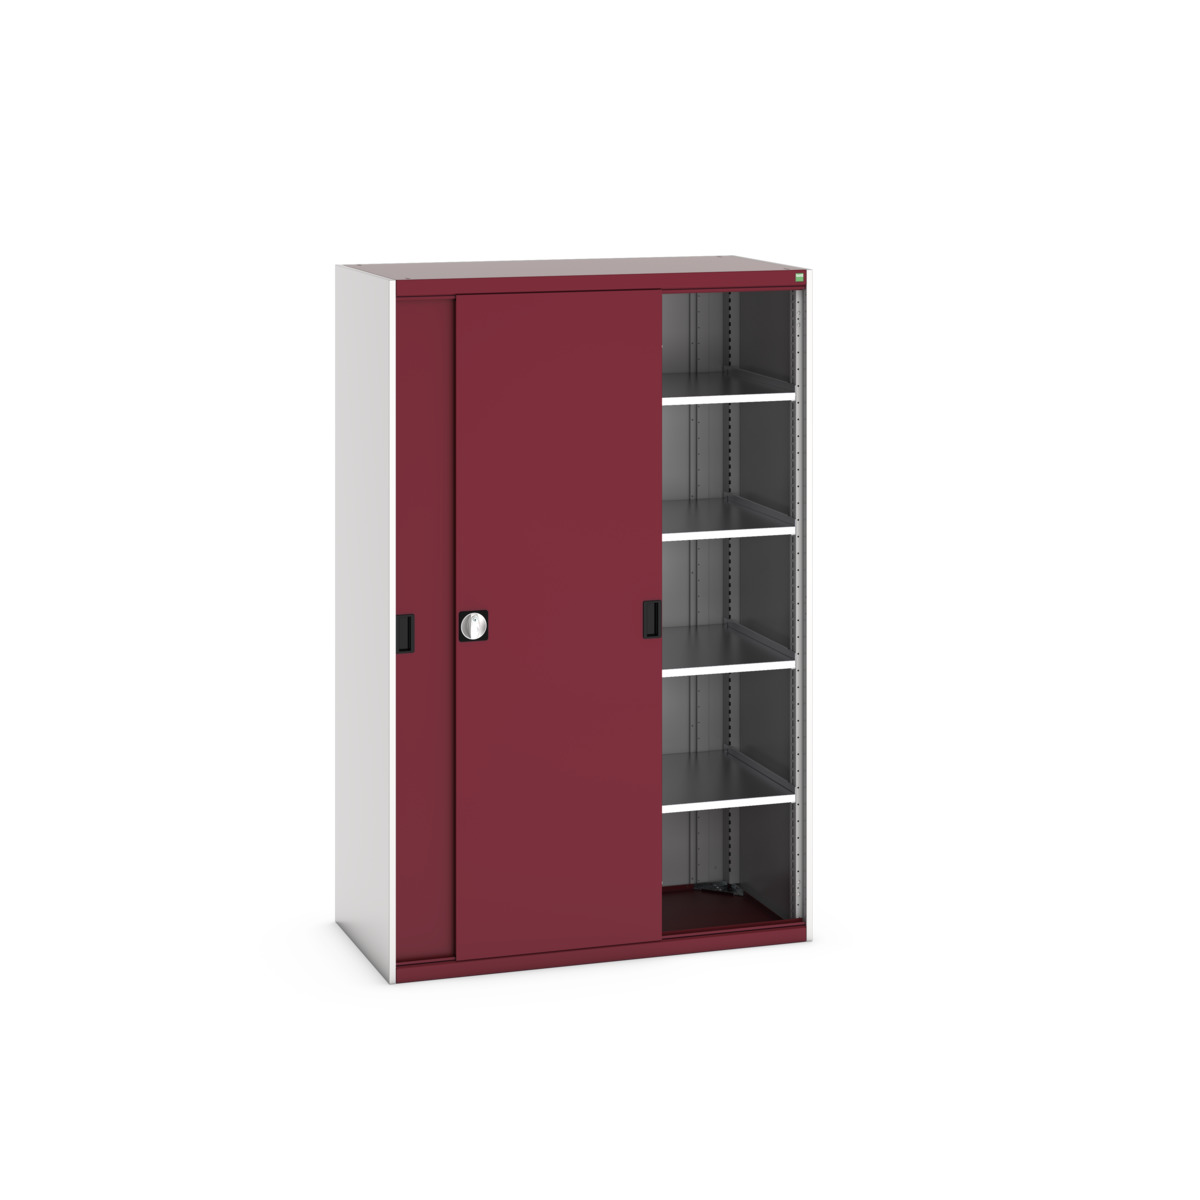 40022065.24V - cubio armoire SMS-13620-1.2